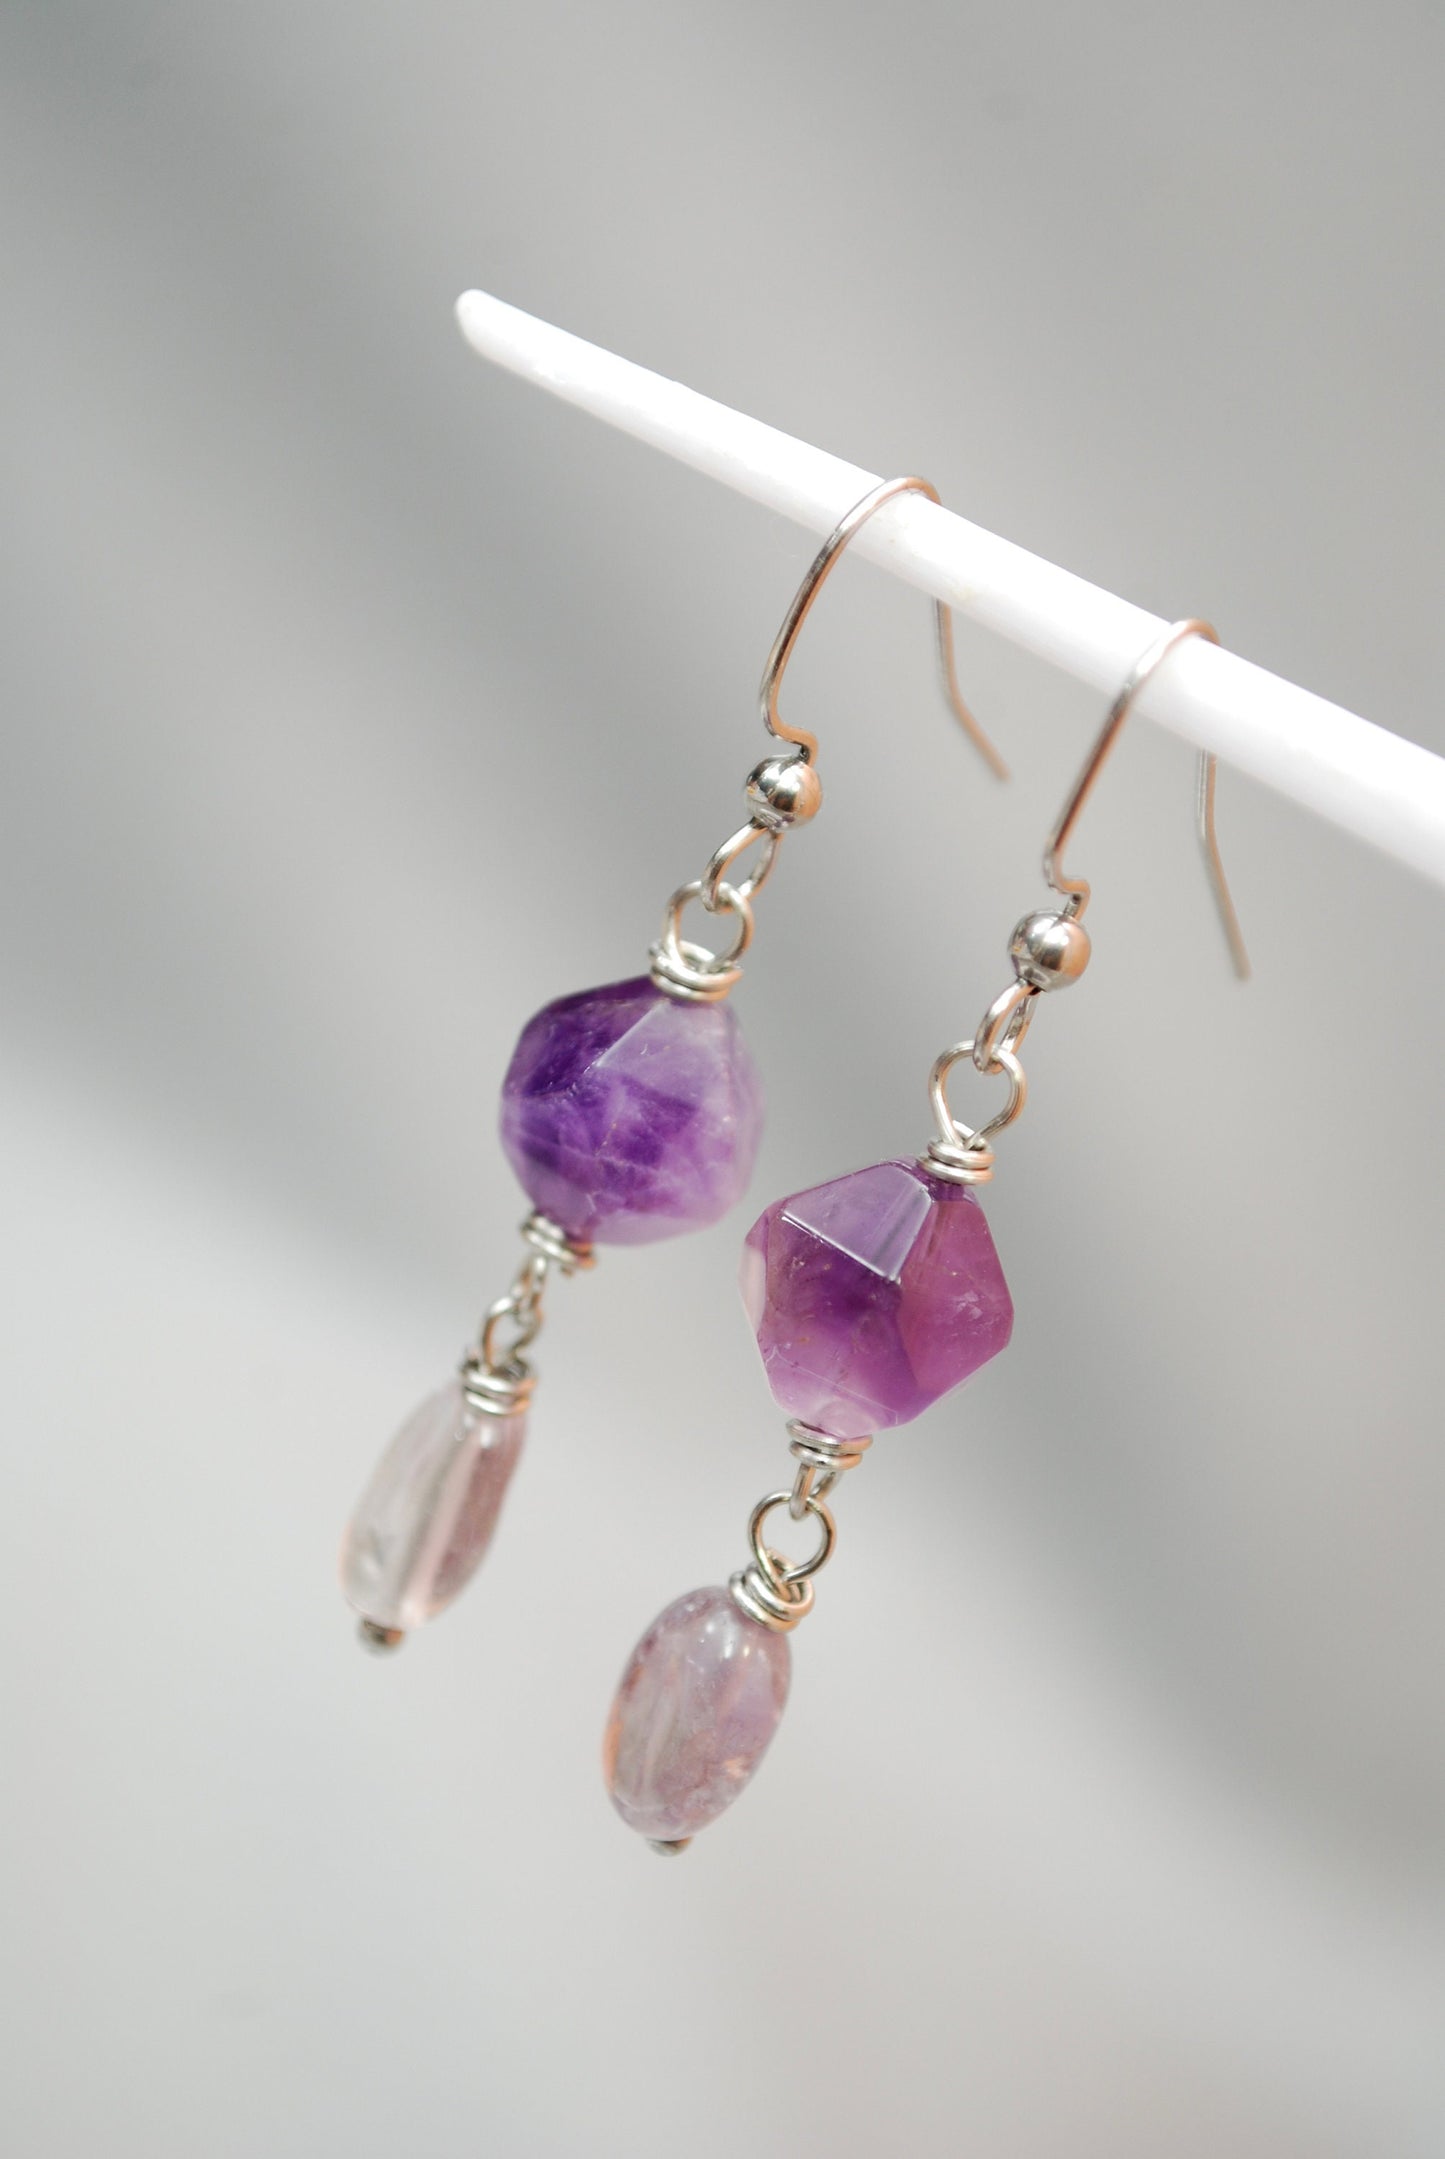 Unique Boho-chic earrings with Amethyst &  Super Seven stone bead. Estibela design. 4.8cm - 1.9". Elegant earrings for parties and cocktails